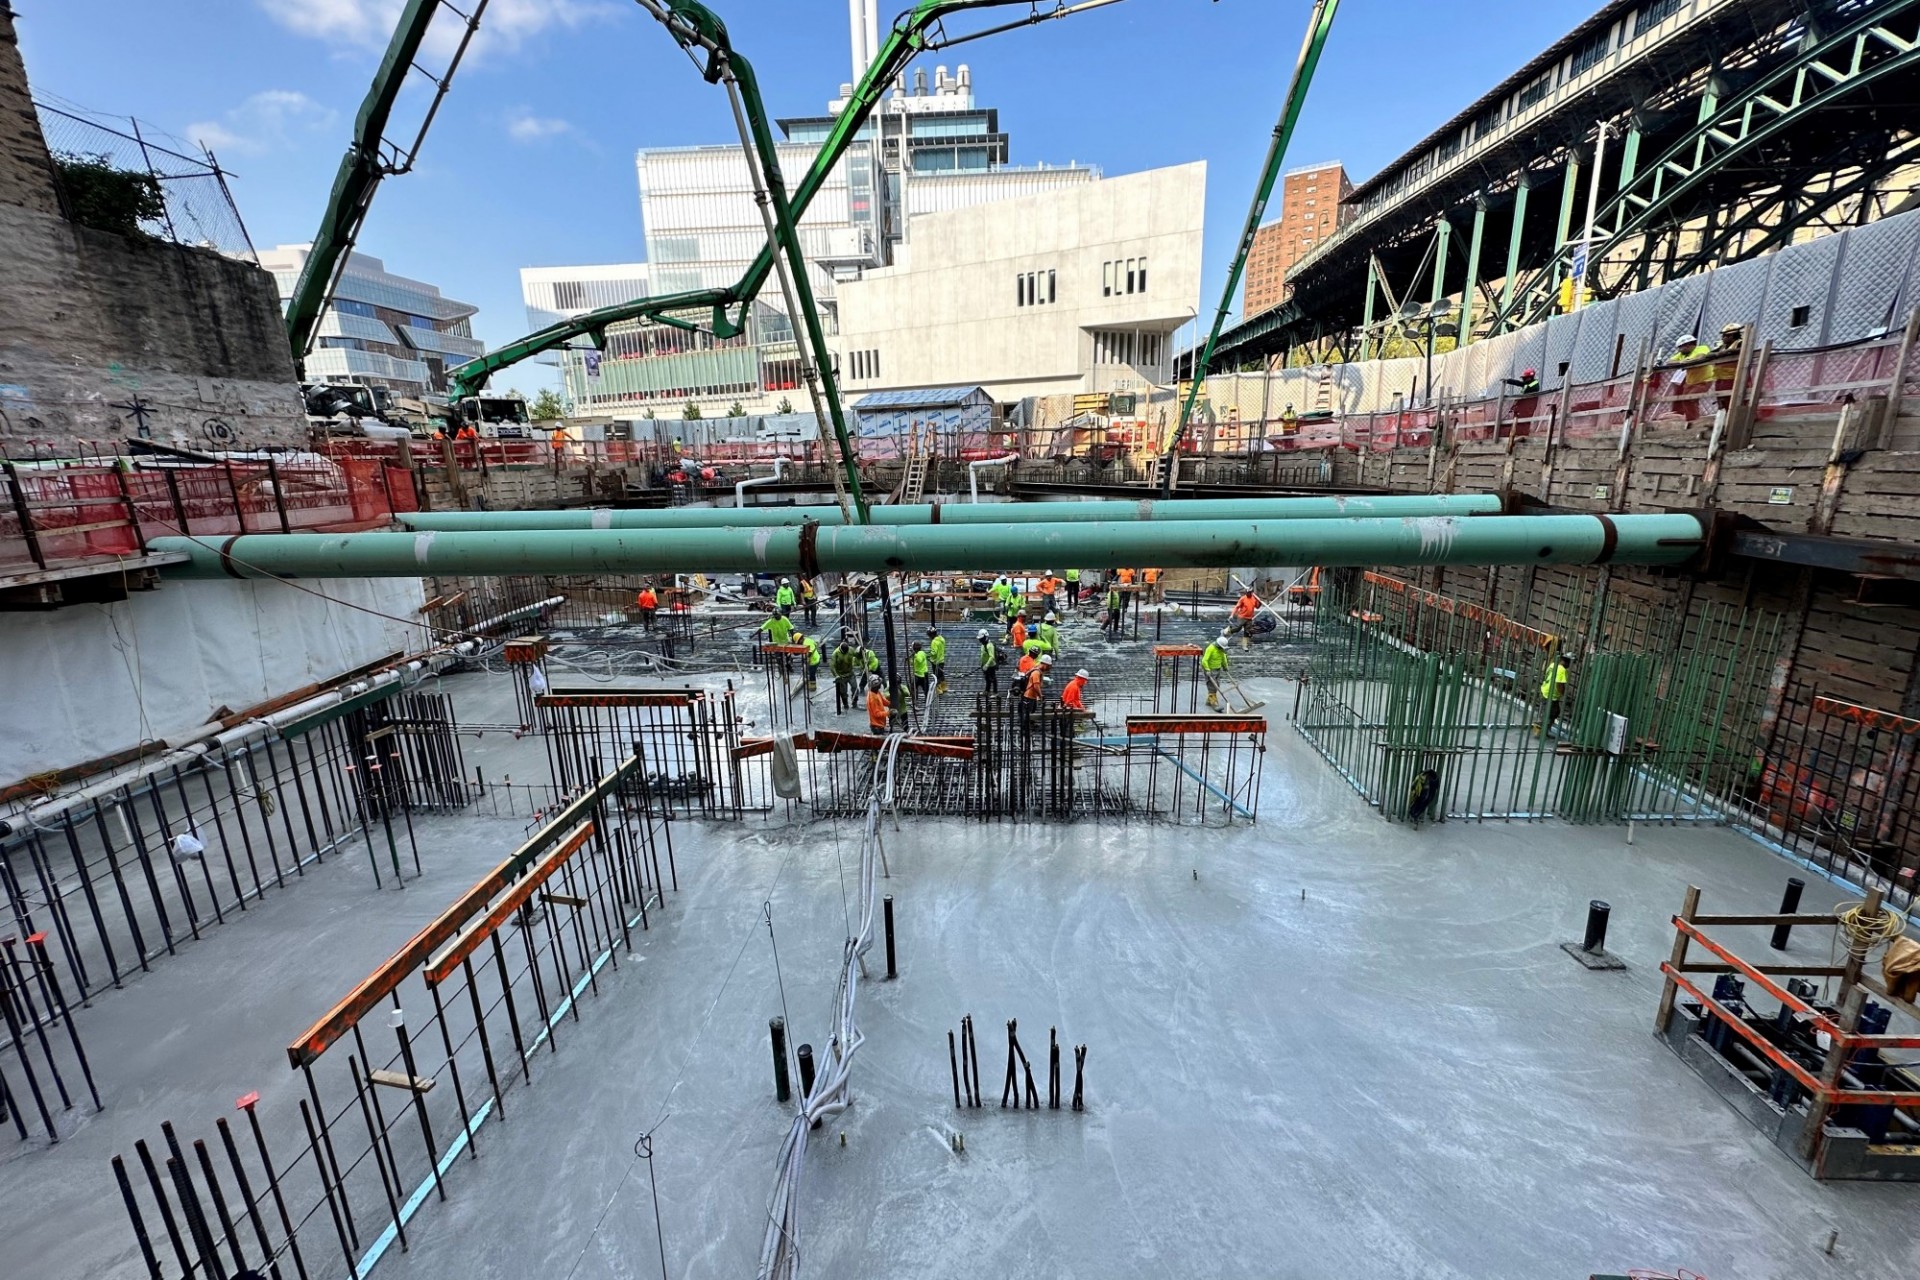 A view of the northern part of the 600 W. 125th Street construction site, with rebar sticking out of concrete on the ground and large green pipes running overhead.